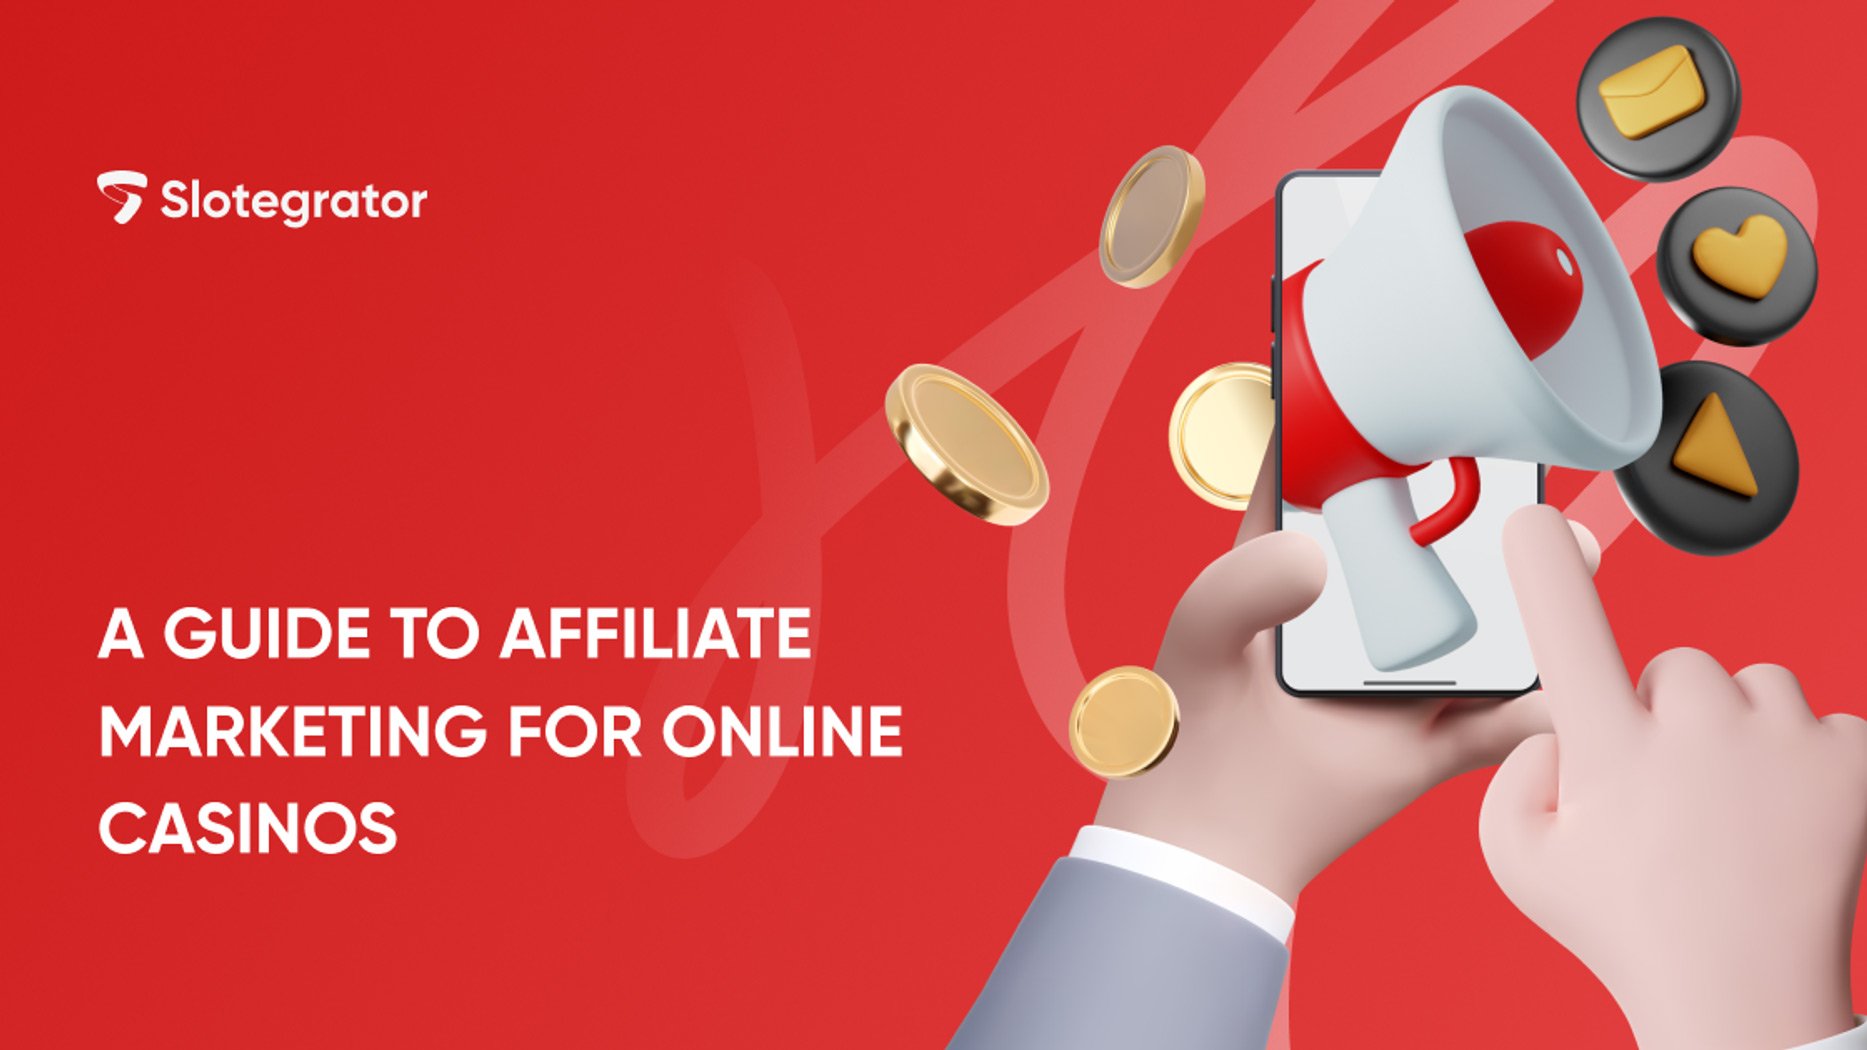 How to attract the target audience to your online casino: Types of affiliates which you need to know